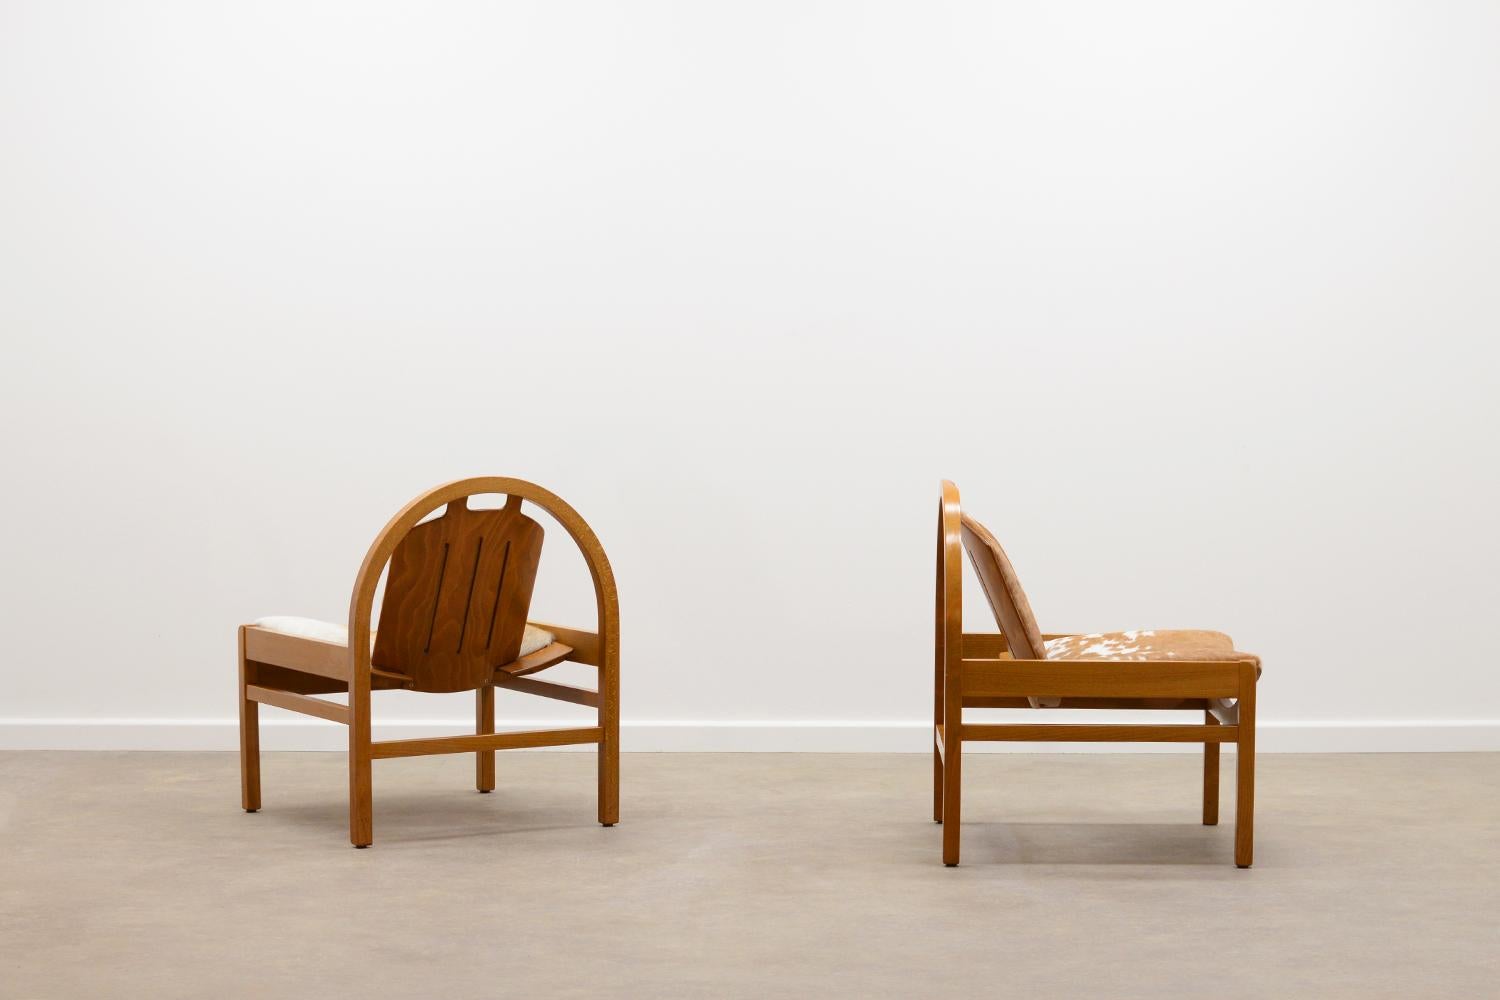 Set of 2 Argos chairs by Baumann France, 70s. This elegant set features a beech wood frame and is reupholstered in cow hide leather. Signed with Baumenn logo and in very good vintage condition.

 